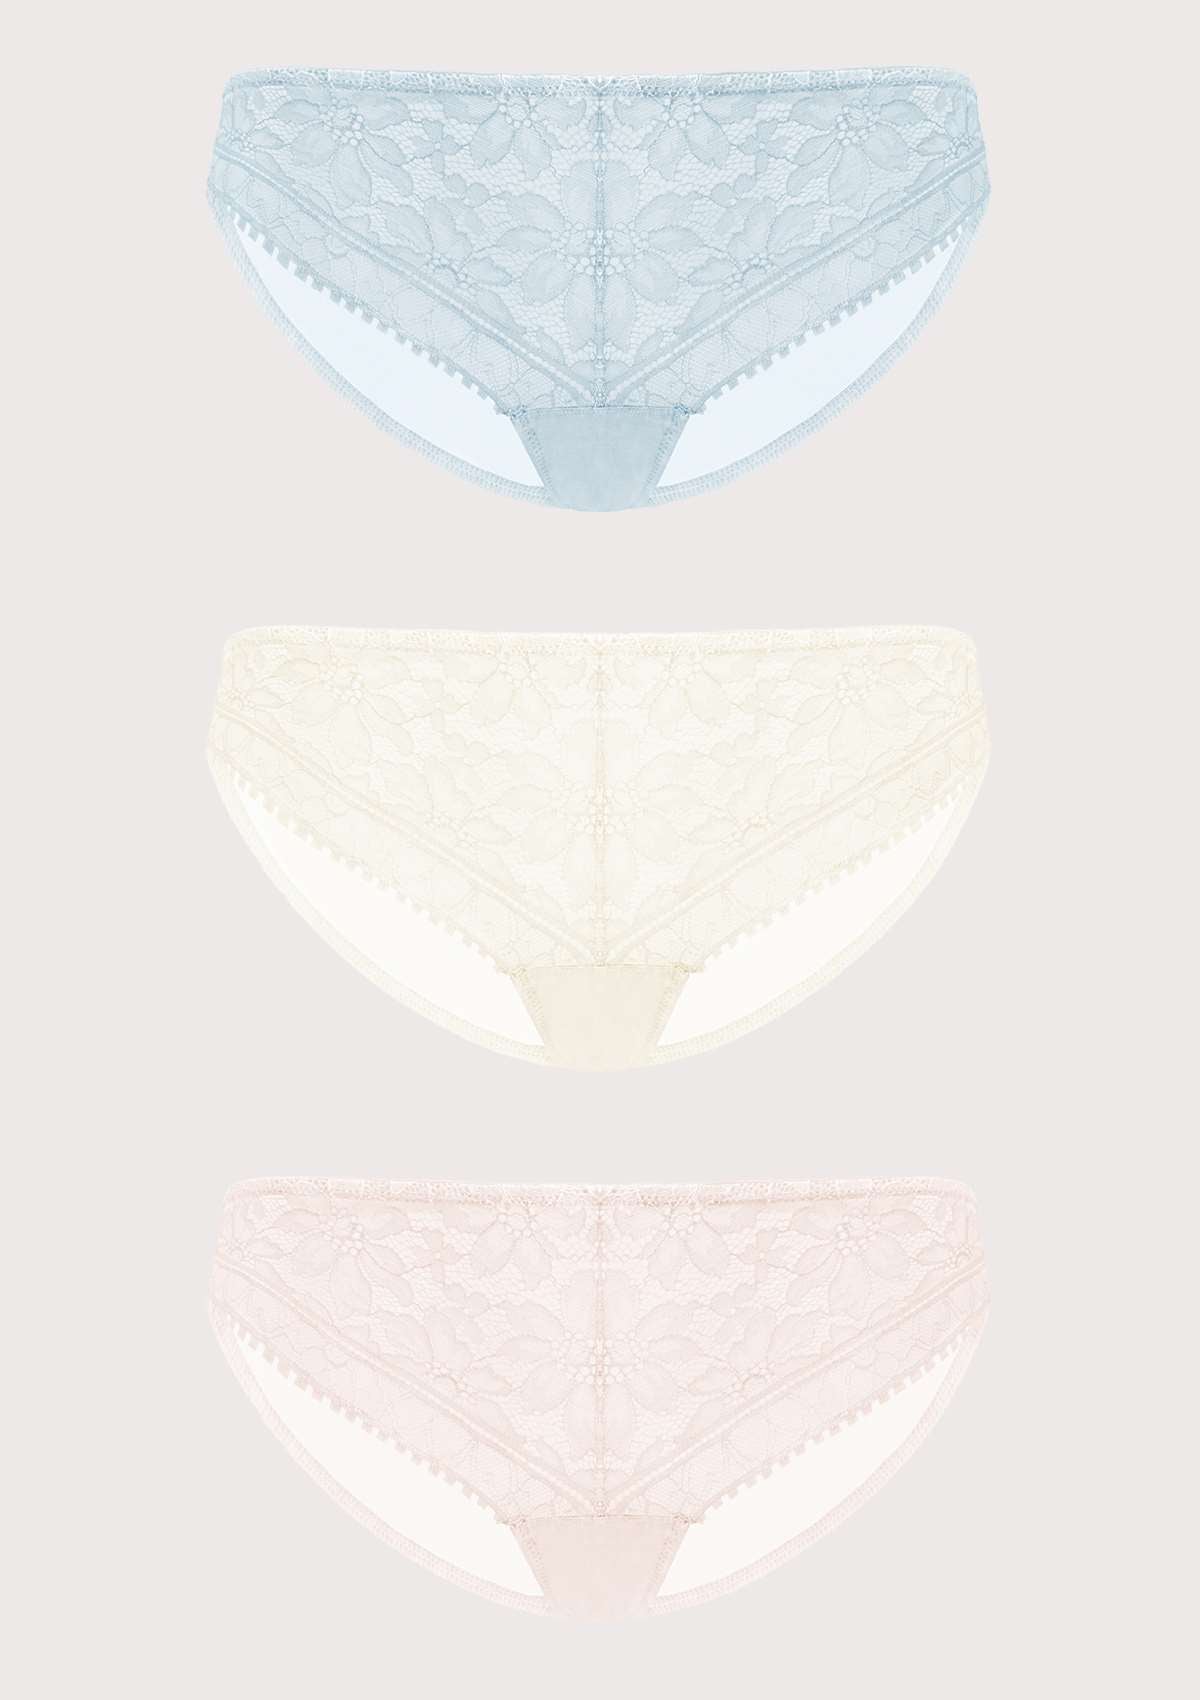 HSIA Silene Sheer Lace Mesh Hipster Underwear 3 Pack - L / Light Blue+Champagne+Light Pink